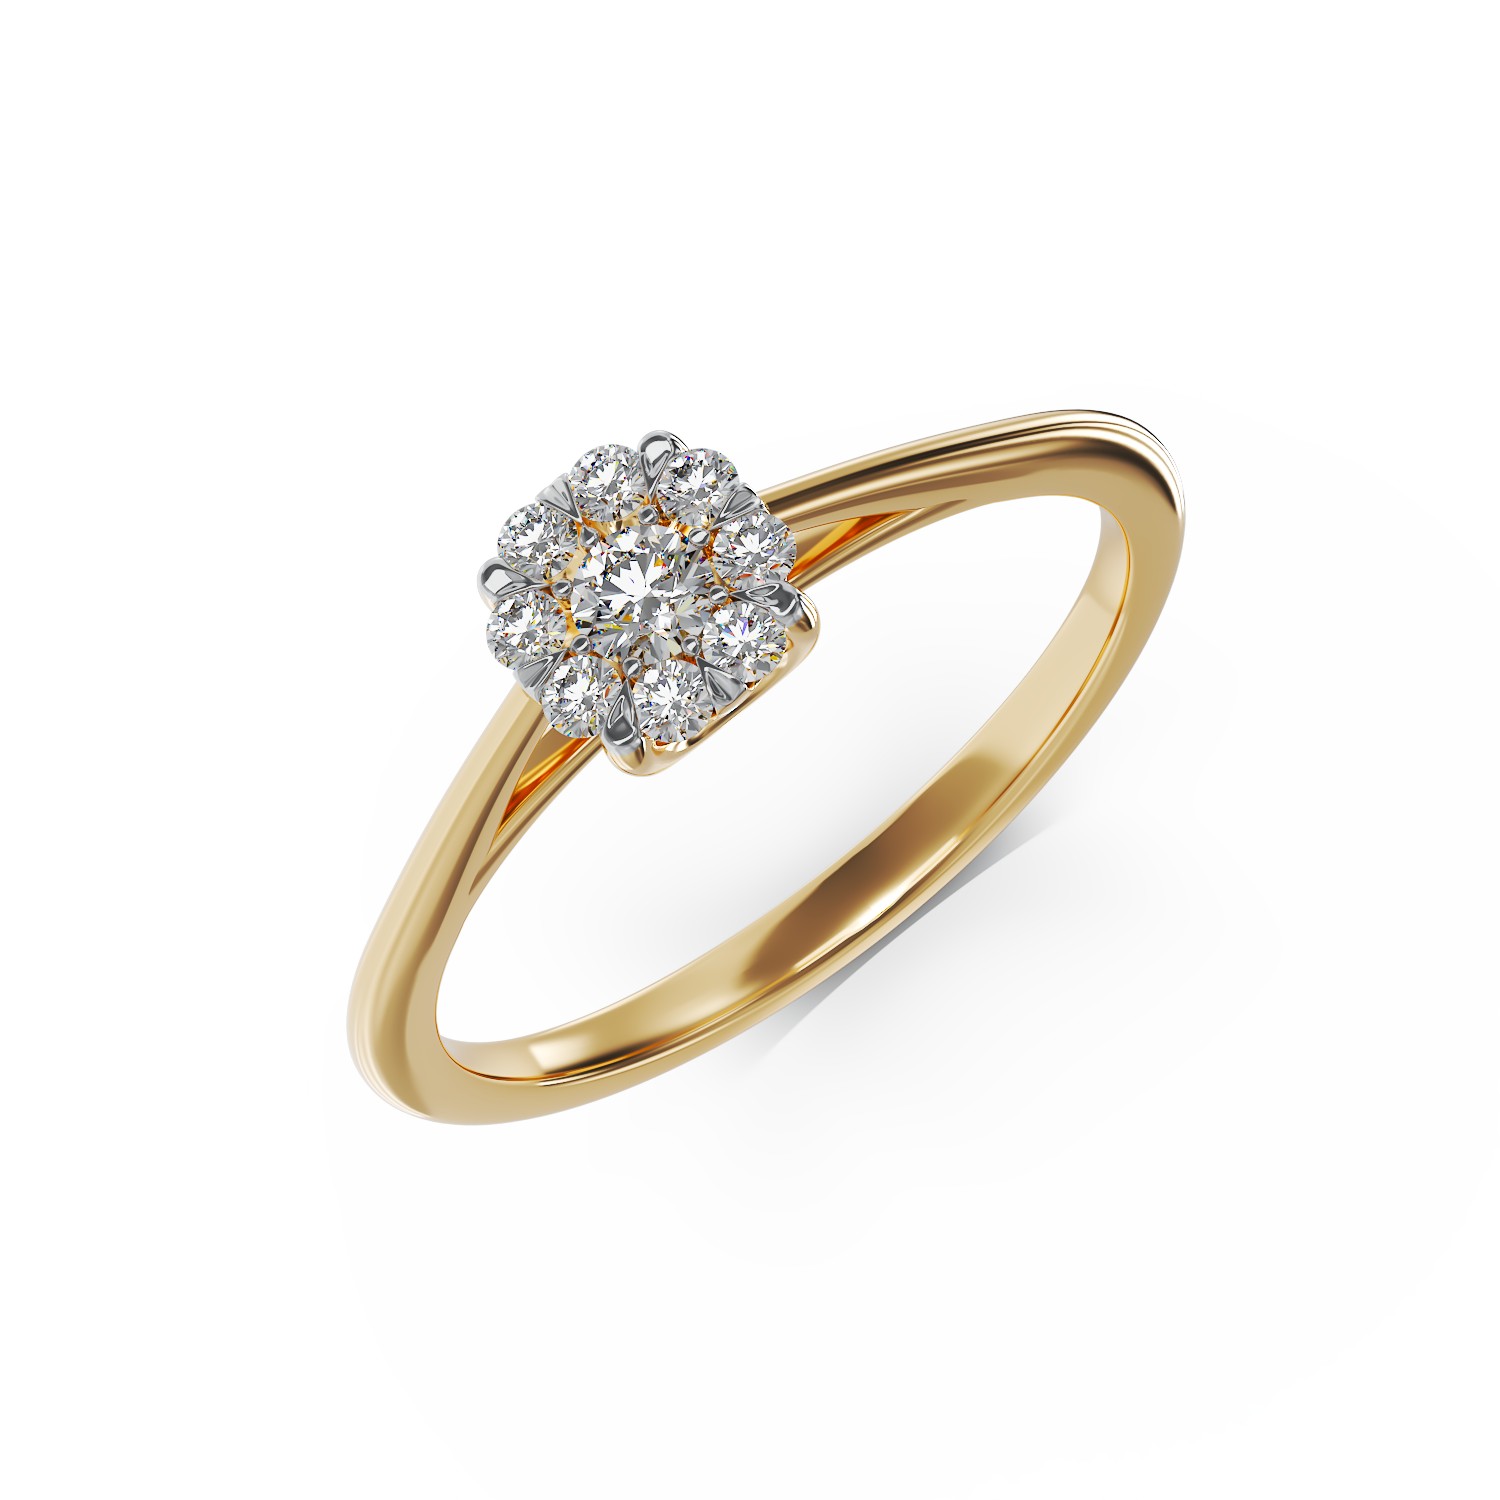 14K yellow gold engagement ring with 0.10ct diamonds